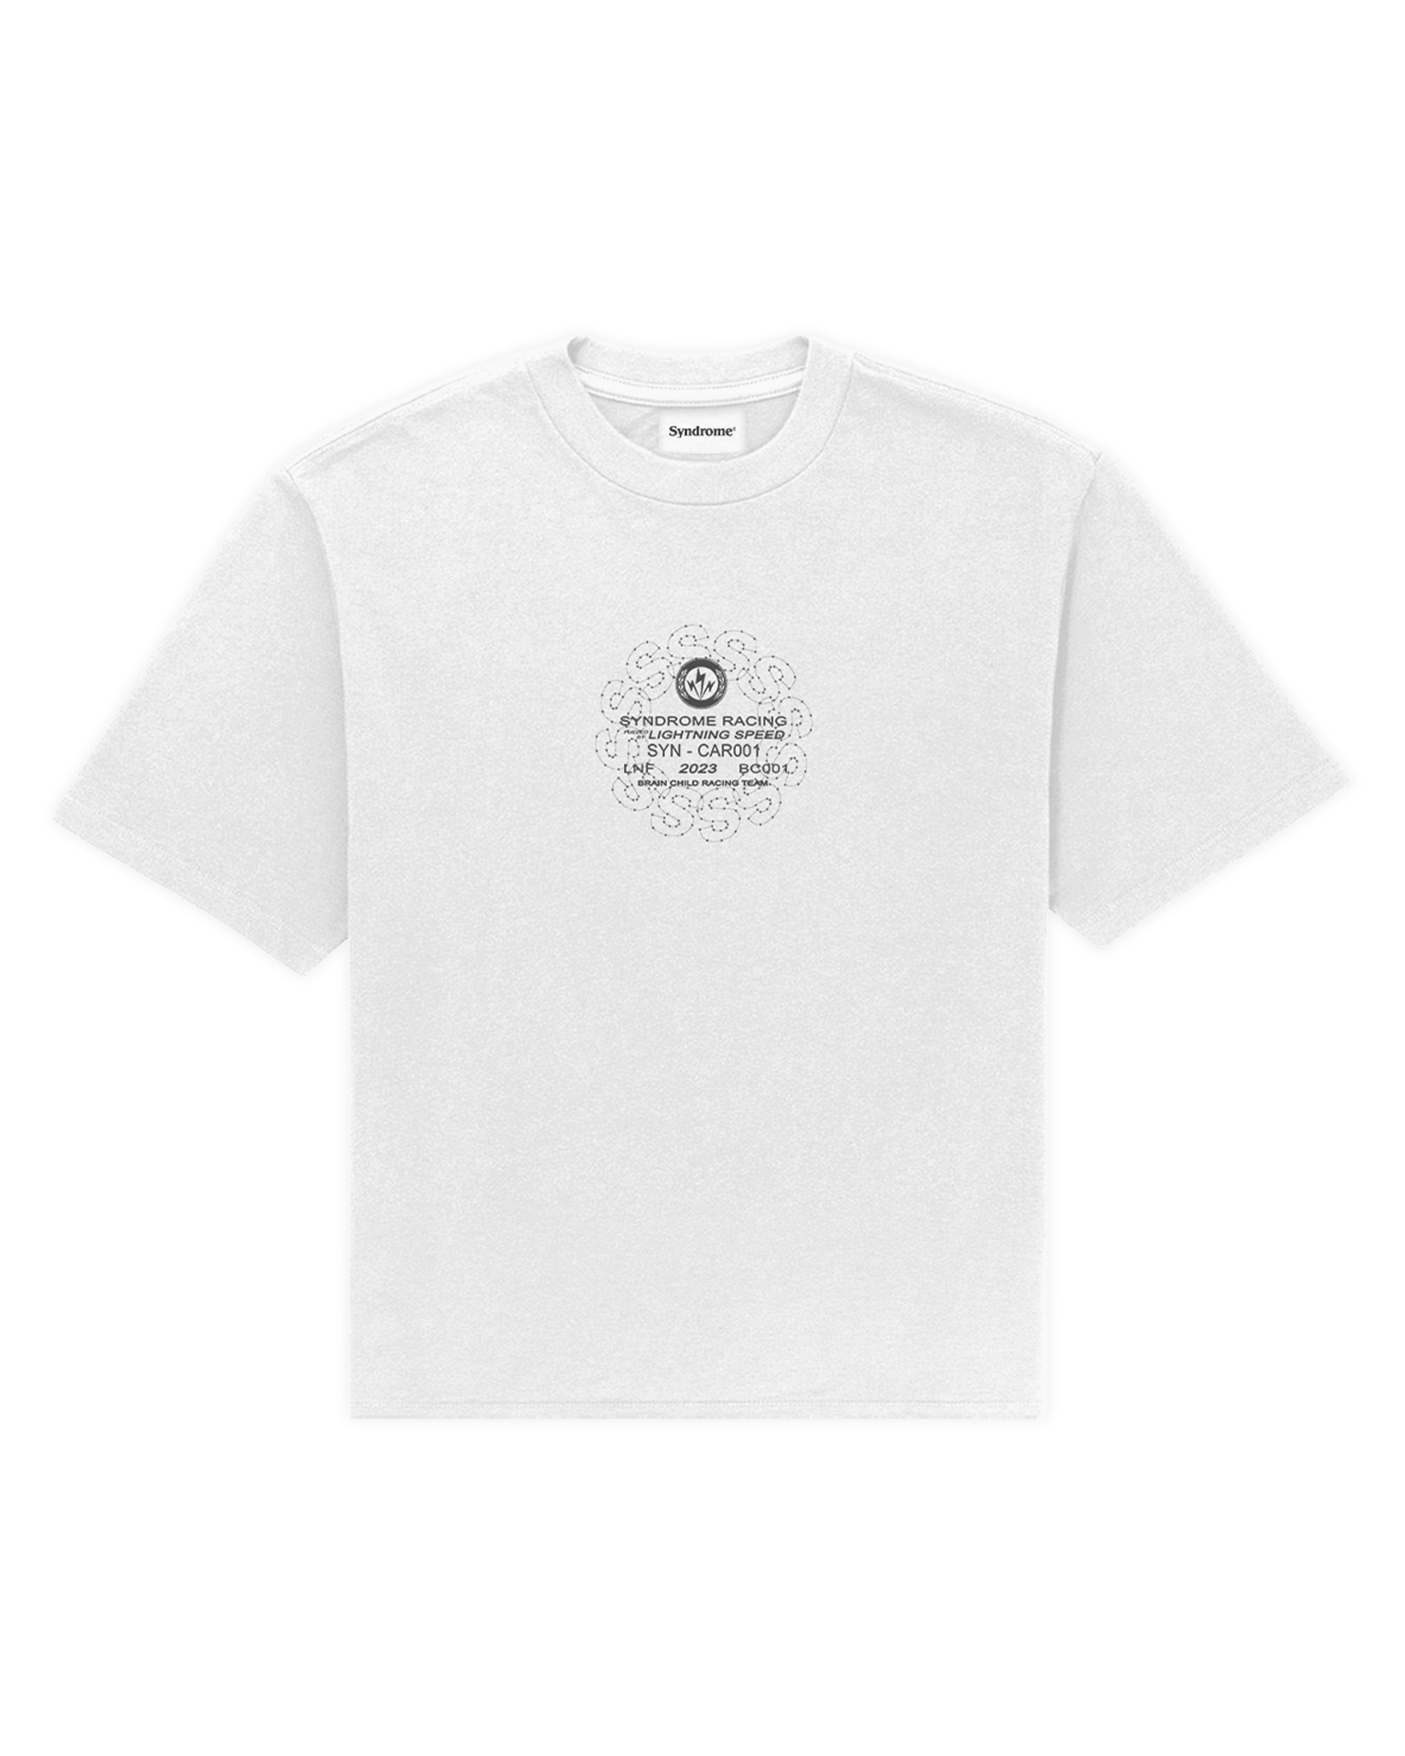 Syndrome Racing Tee – Syndrome Supply